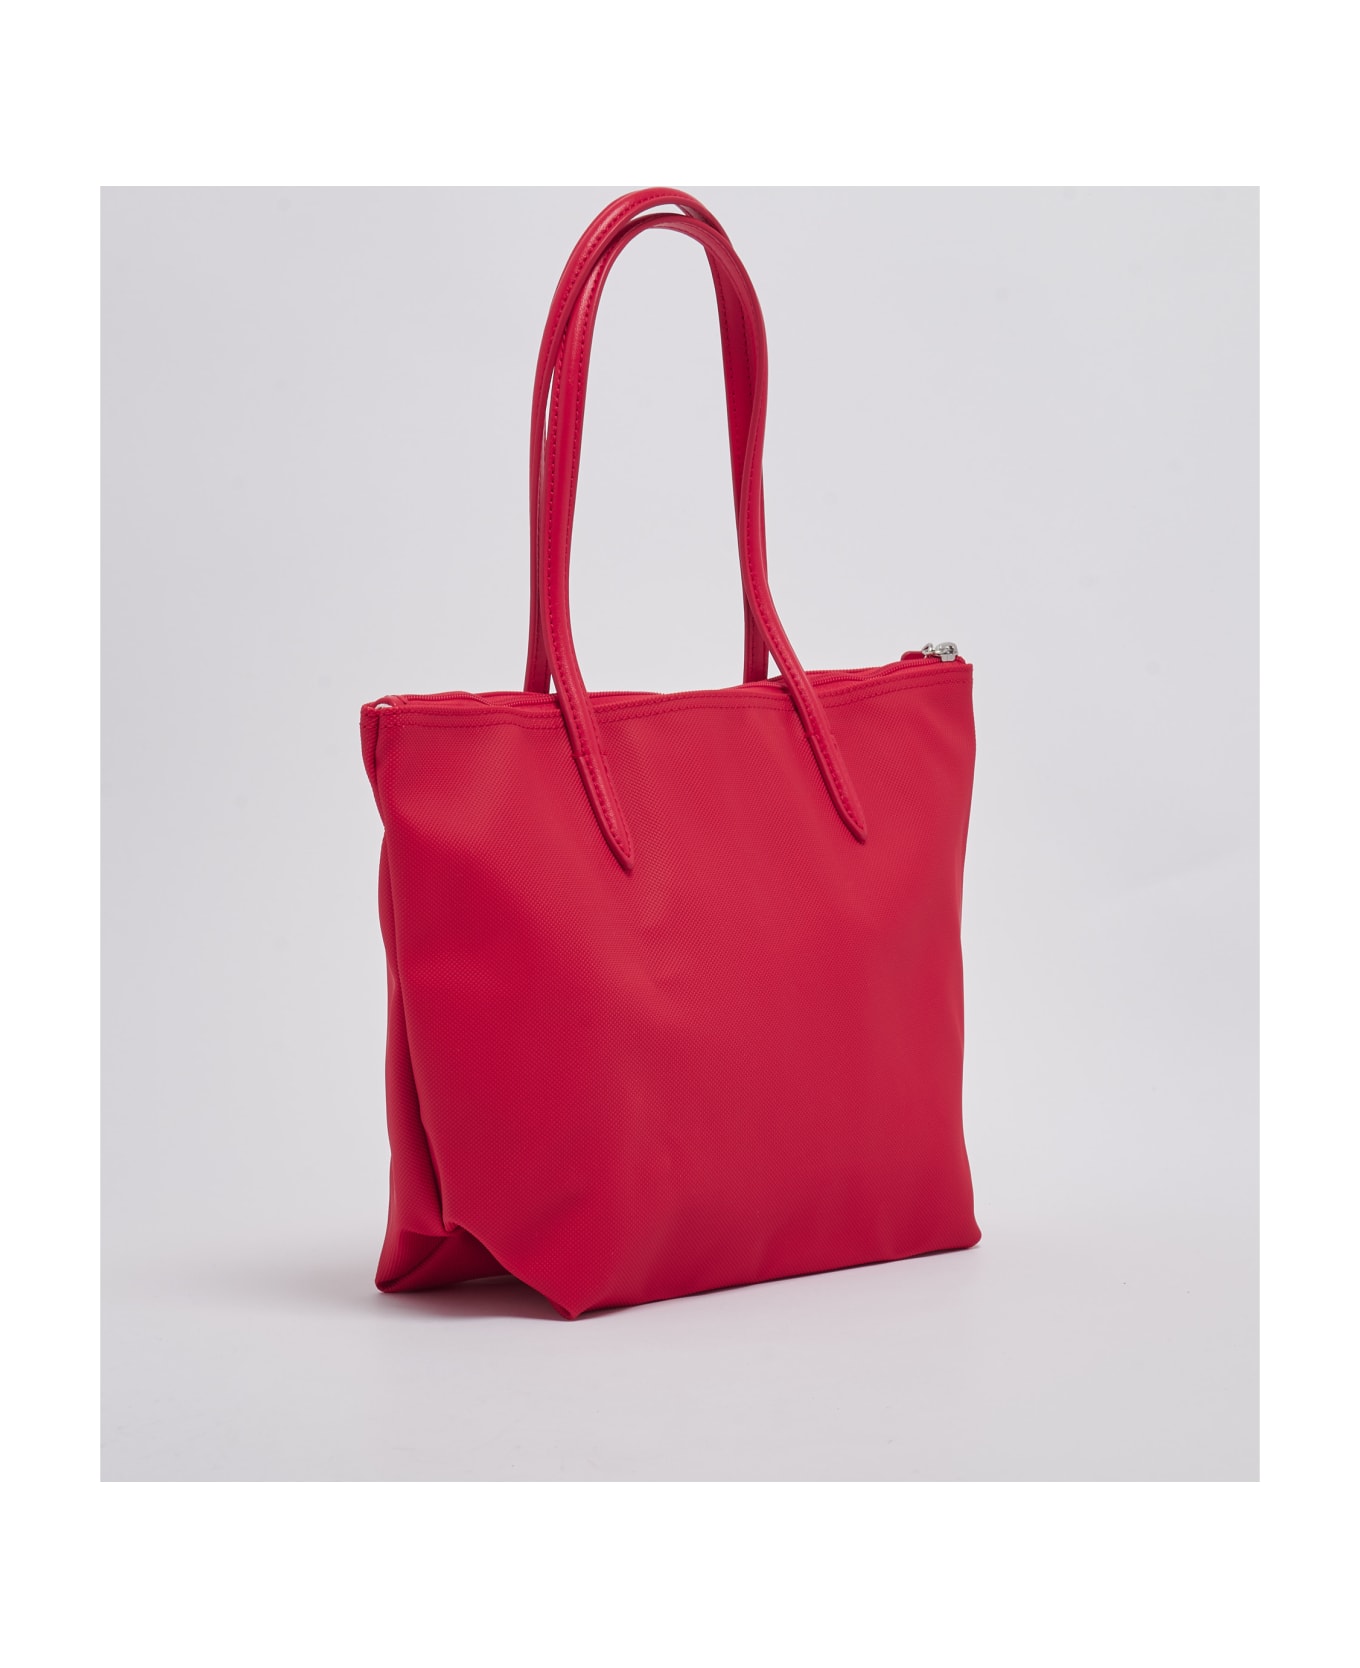 Lacoste Pvc Shopping Bag - ROSSO トートバッグ